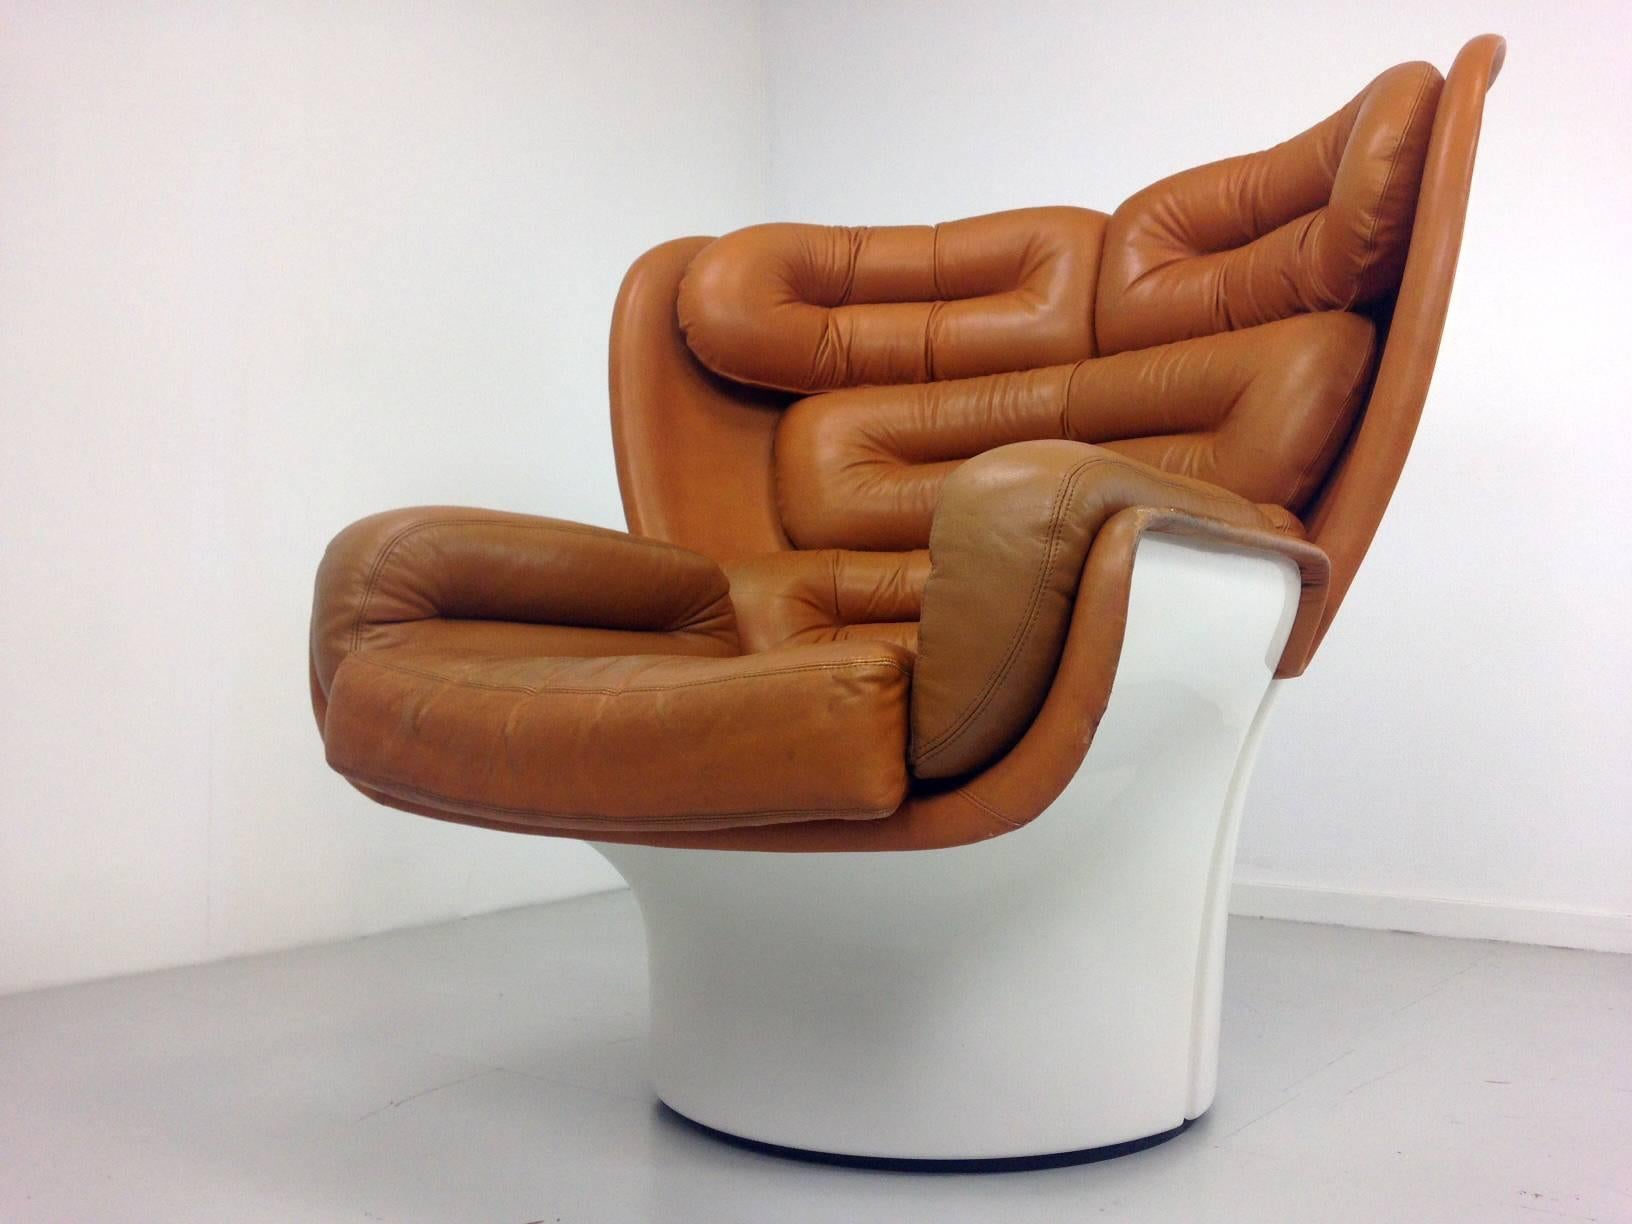 Leather Elda by Joe Colombo for Comfort Italy, 1960s